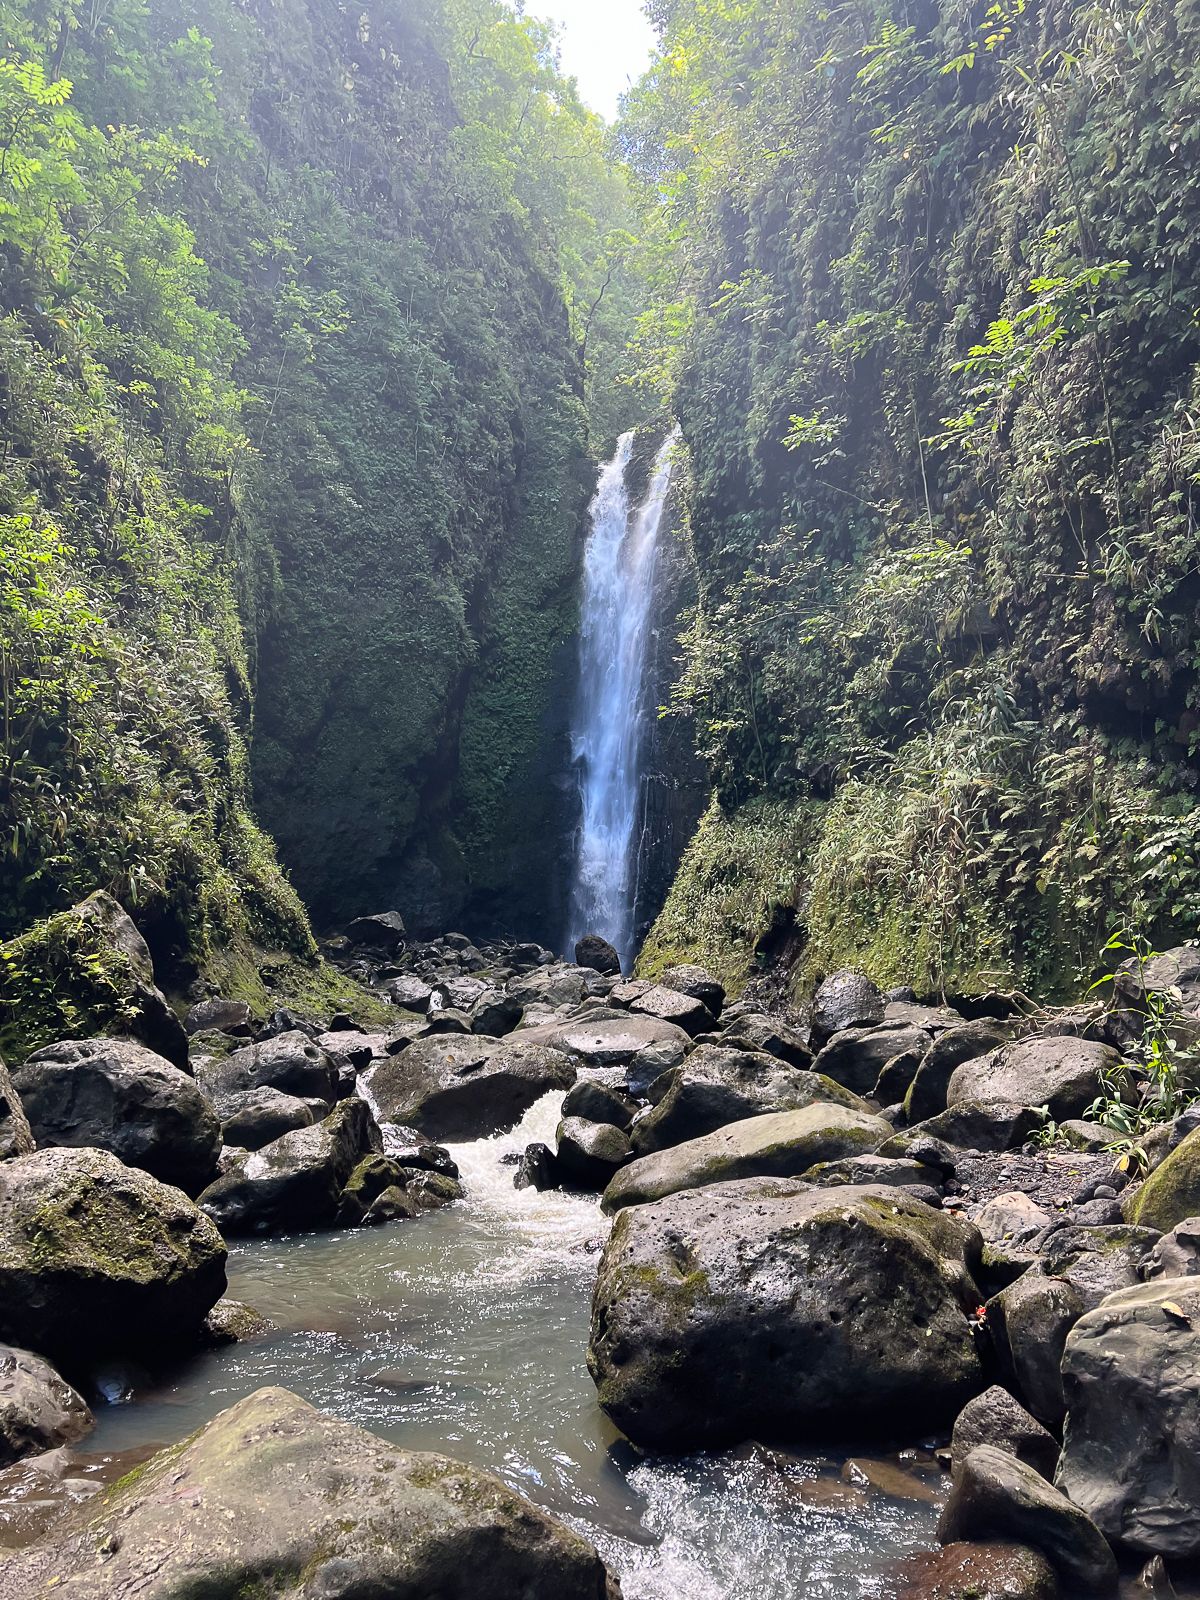 A waterfall on the road to hana